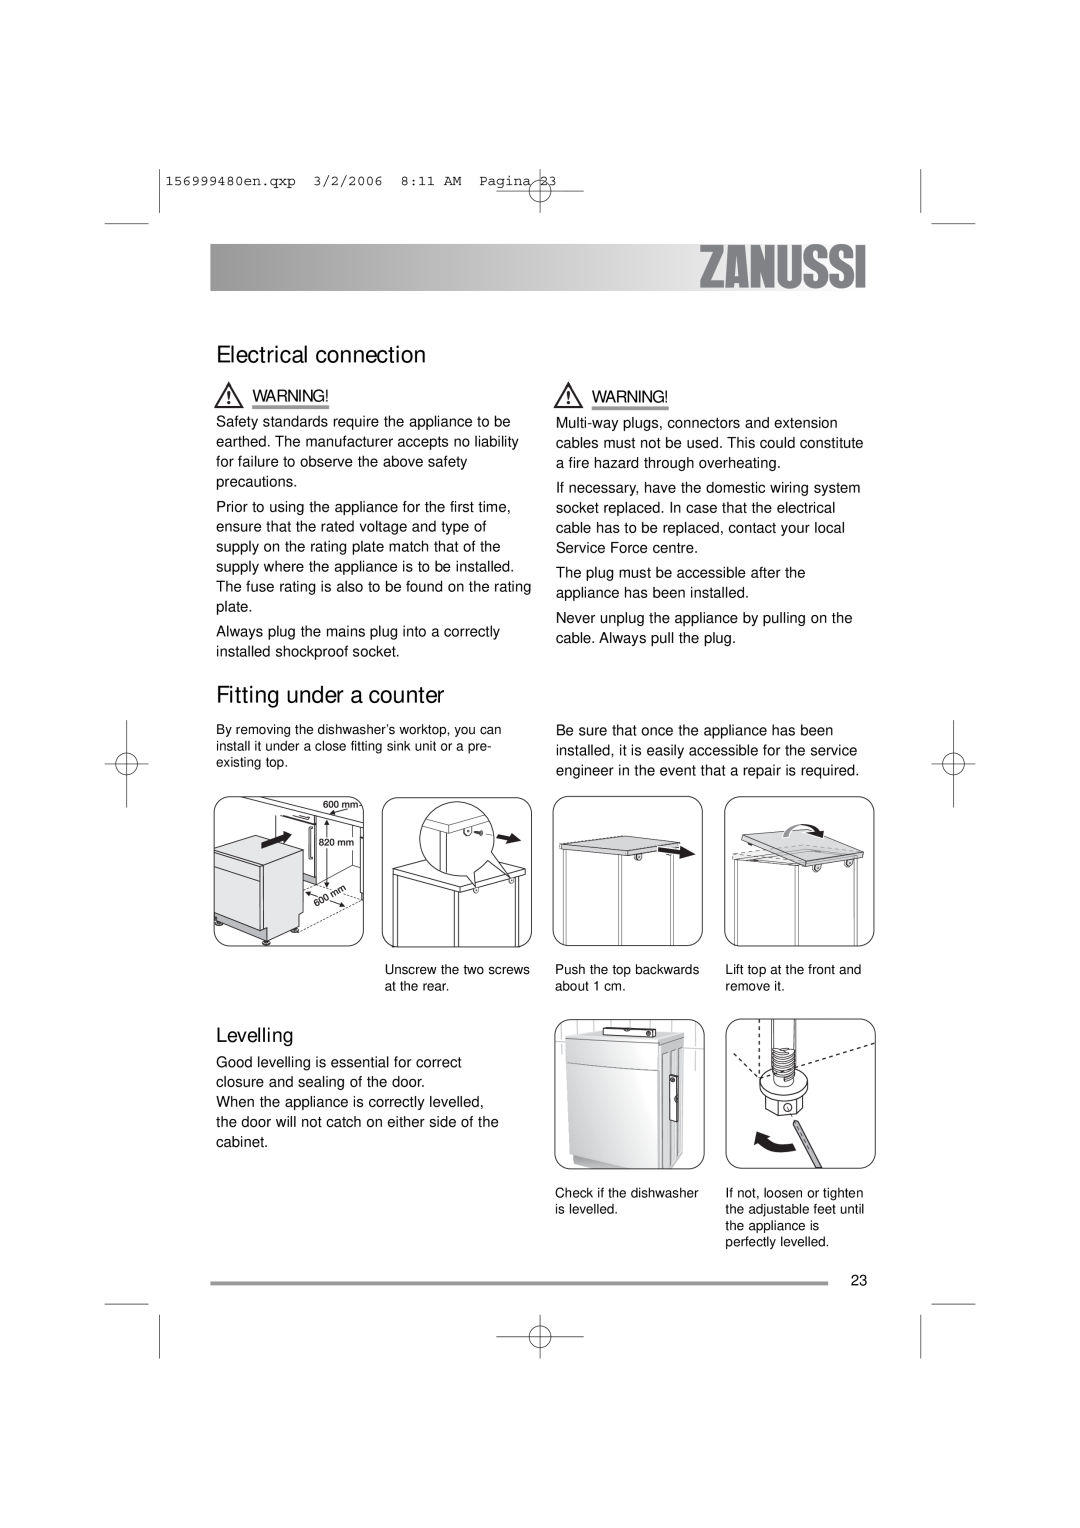 Zanussi ZDF311 user manual Electrical connection, Fitting under a counter, Levelling 